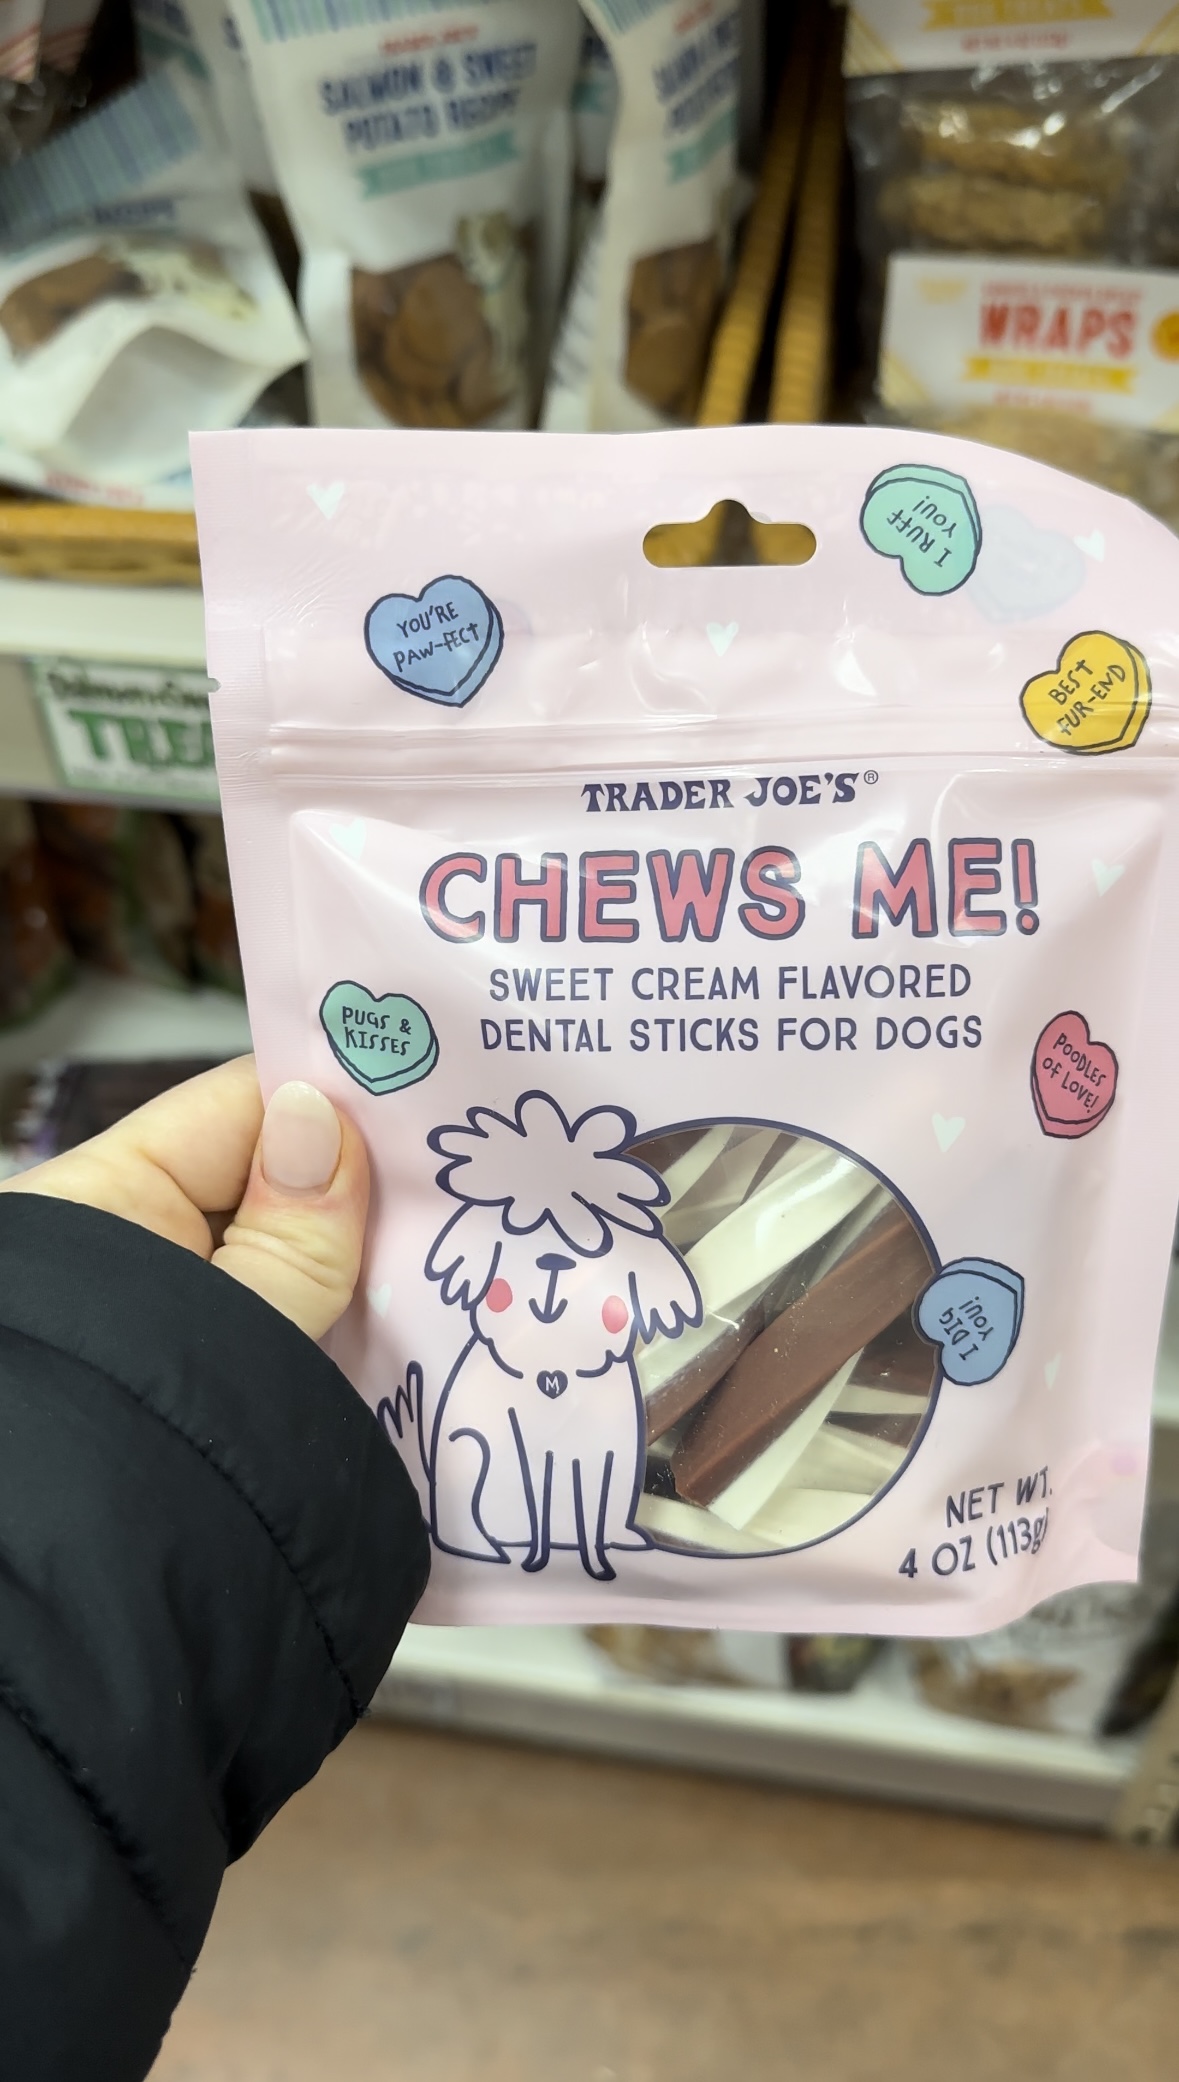 trader joe's valentine's day gifts for dogs treats chews me